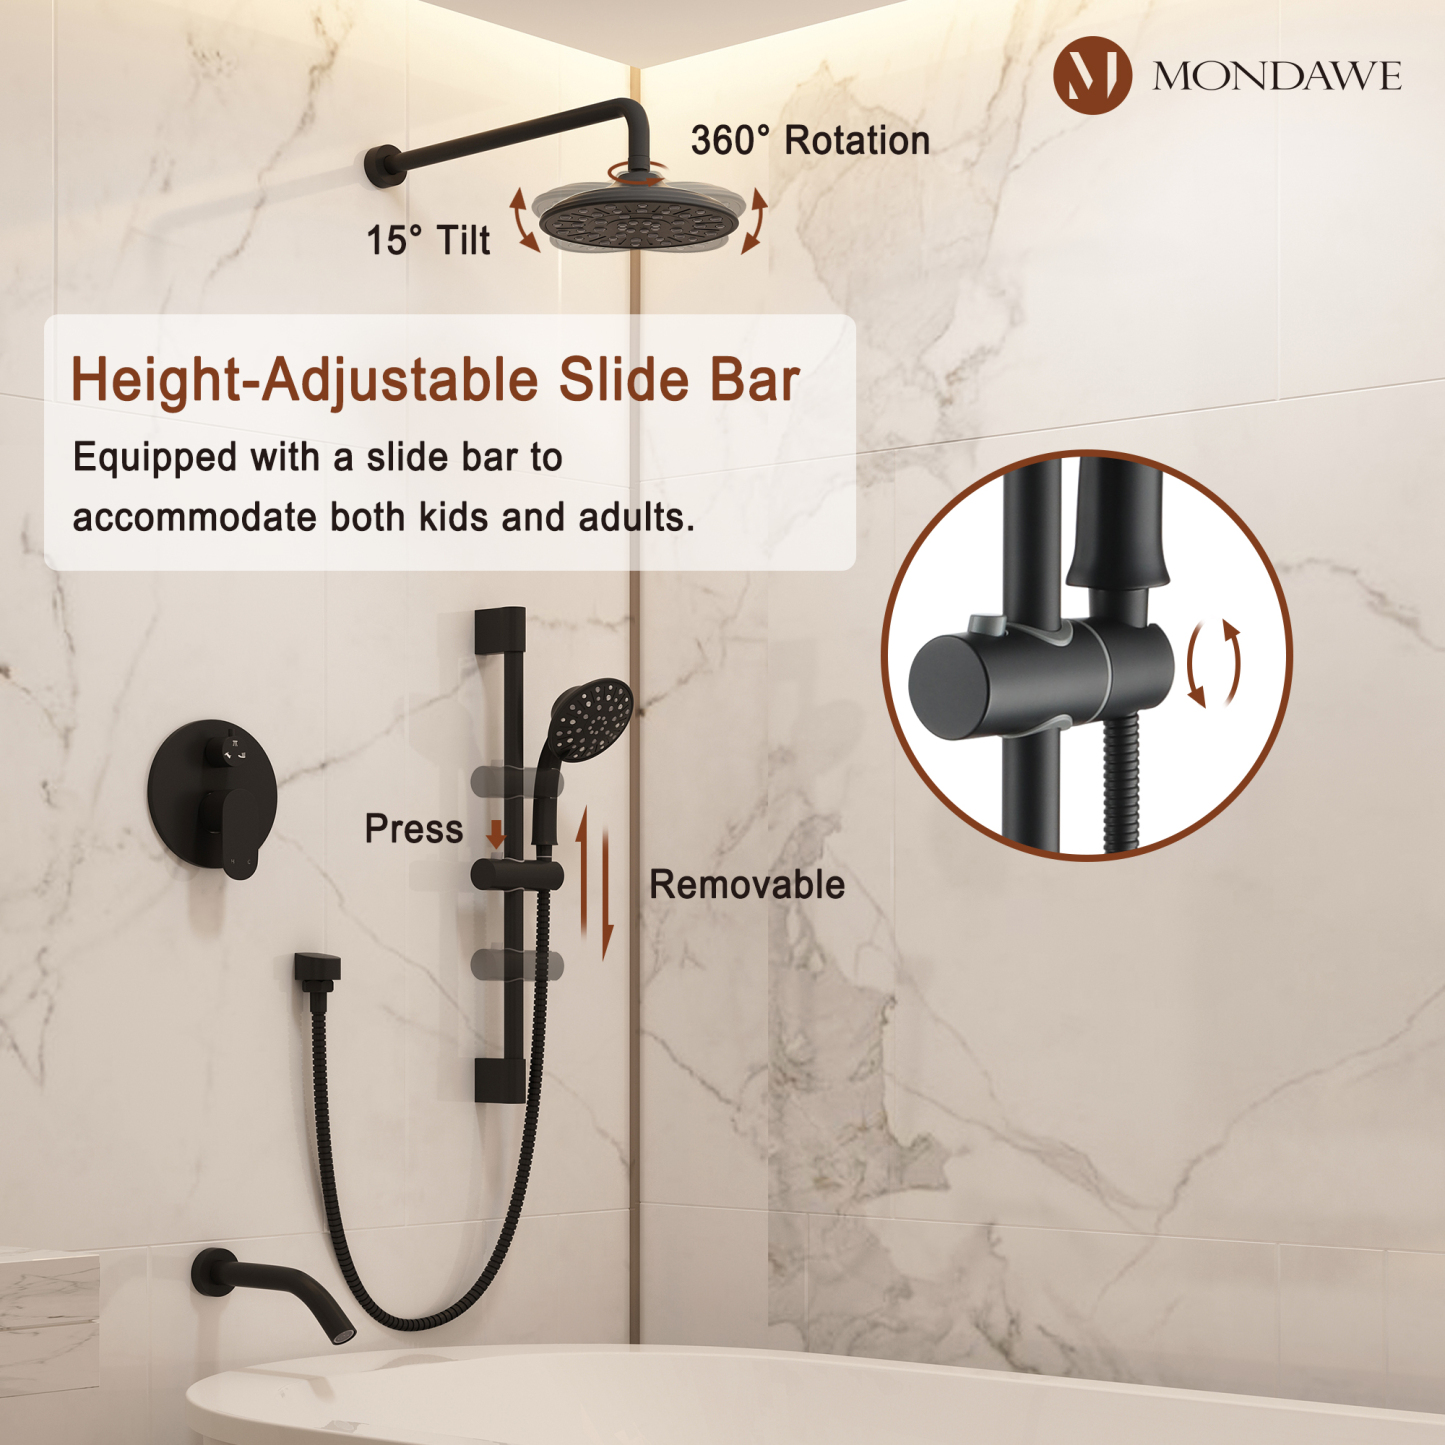 Mondawe Retro Series 2-Spray Patterns with 1.8 GPM 8 in. Rain Wall Mount Dual Shower Heads with Handheld and Spout in Brushed Nickel/ Black/ Bronze/Brushed Gold